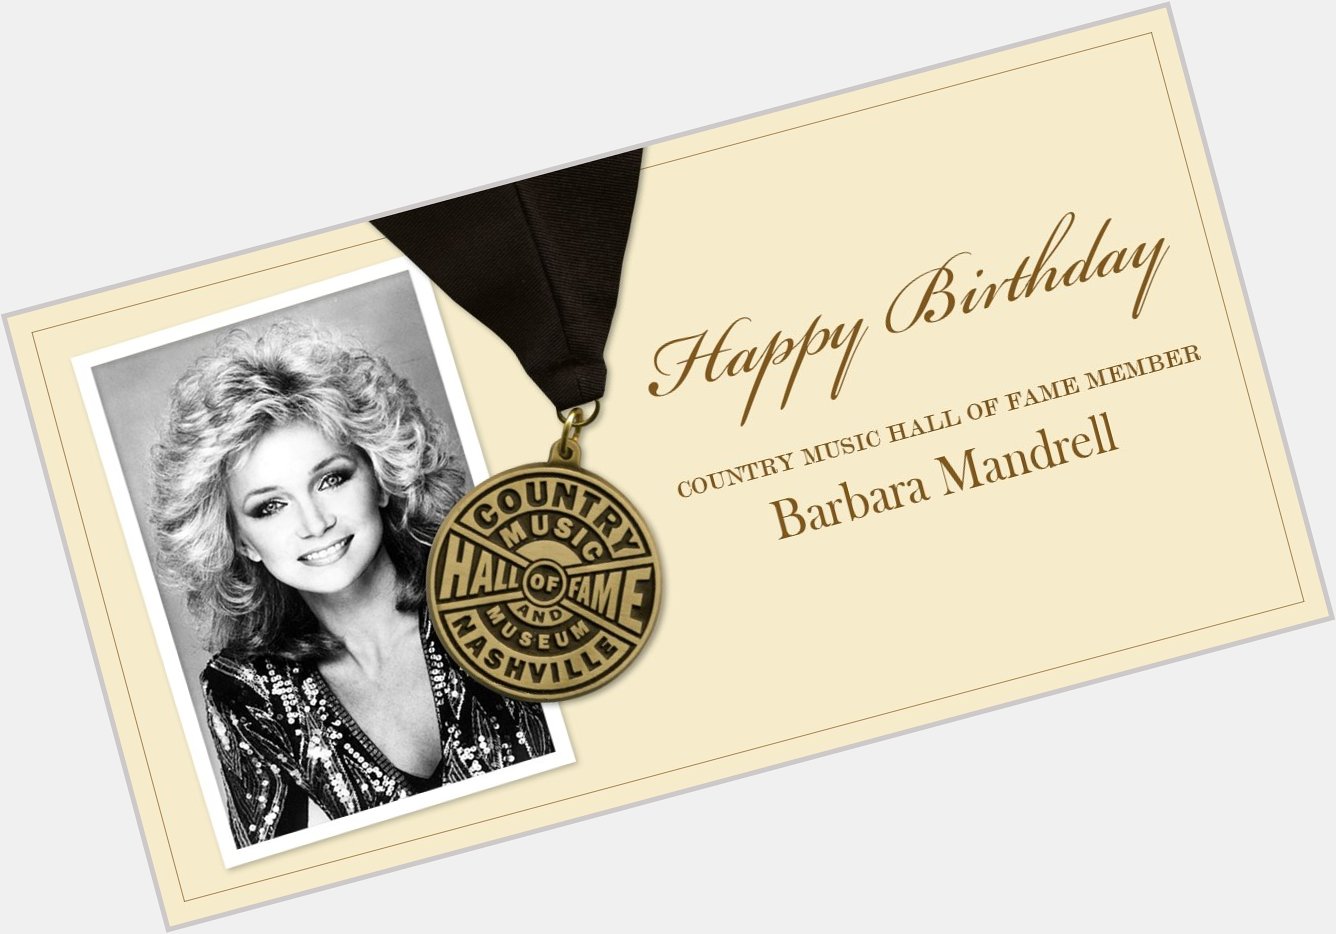 Help us wish Country Music Hall of Fame member Barbara Mandrell a very happy birthday! 